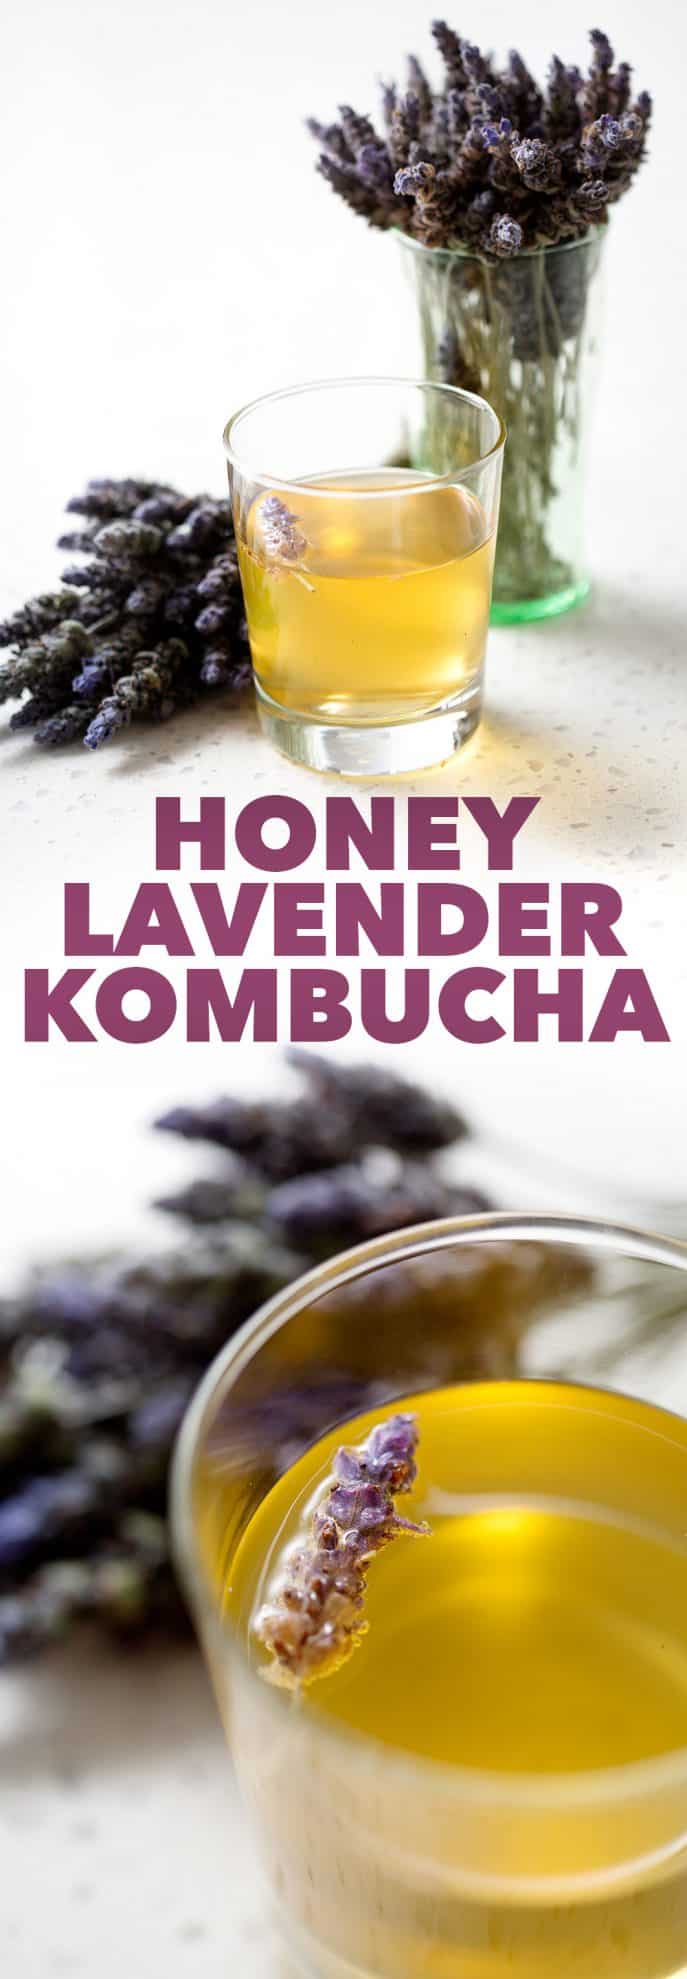 Honey Lavender Kombucha in glass with bunches of lavender on white background